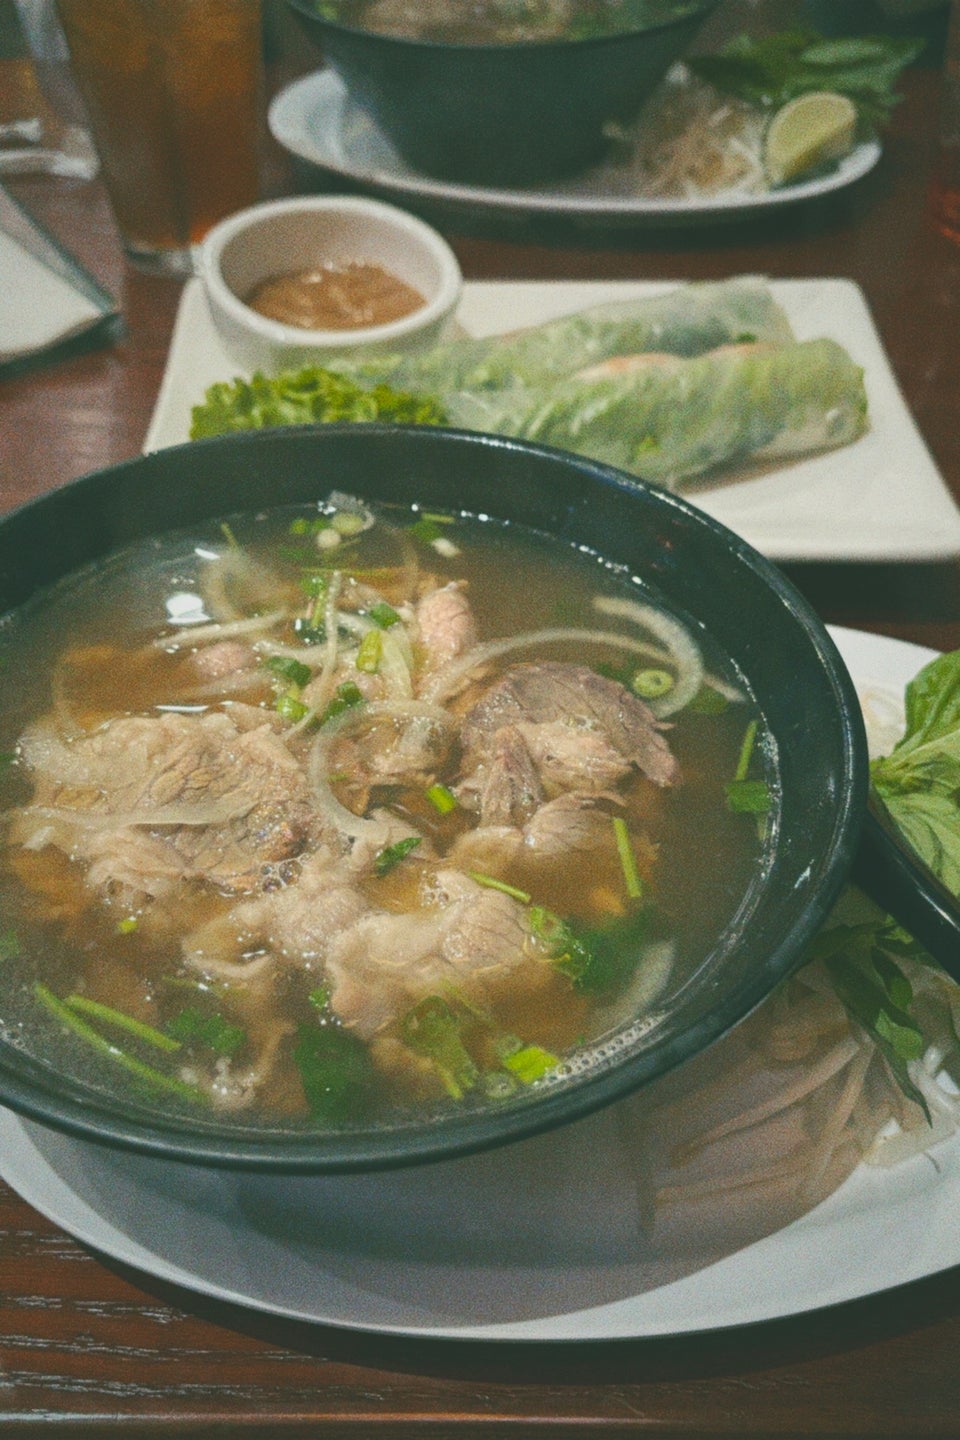 Pho Viet Anh